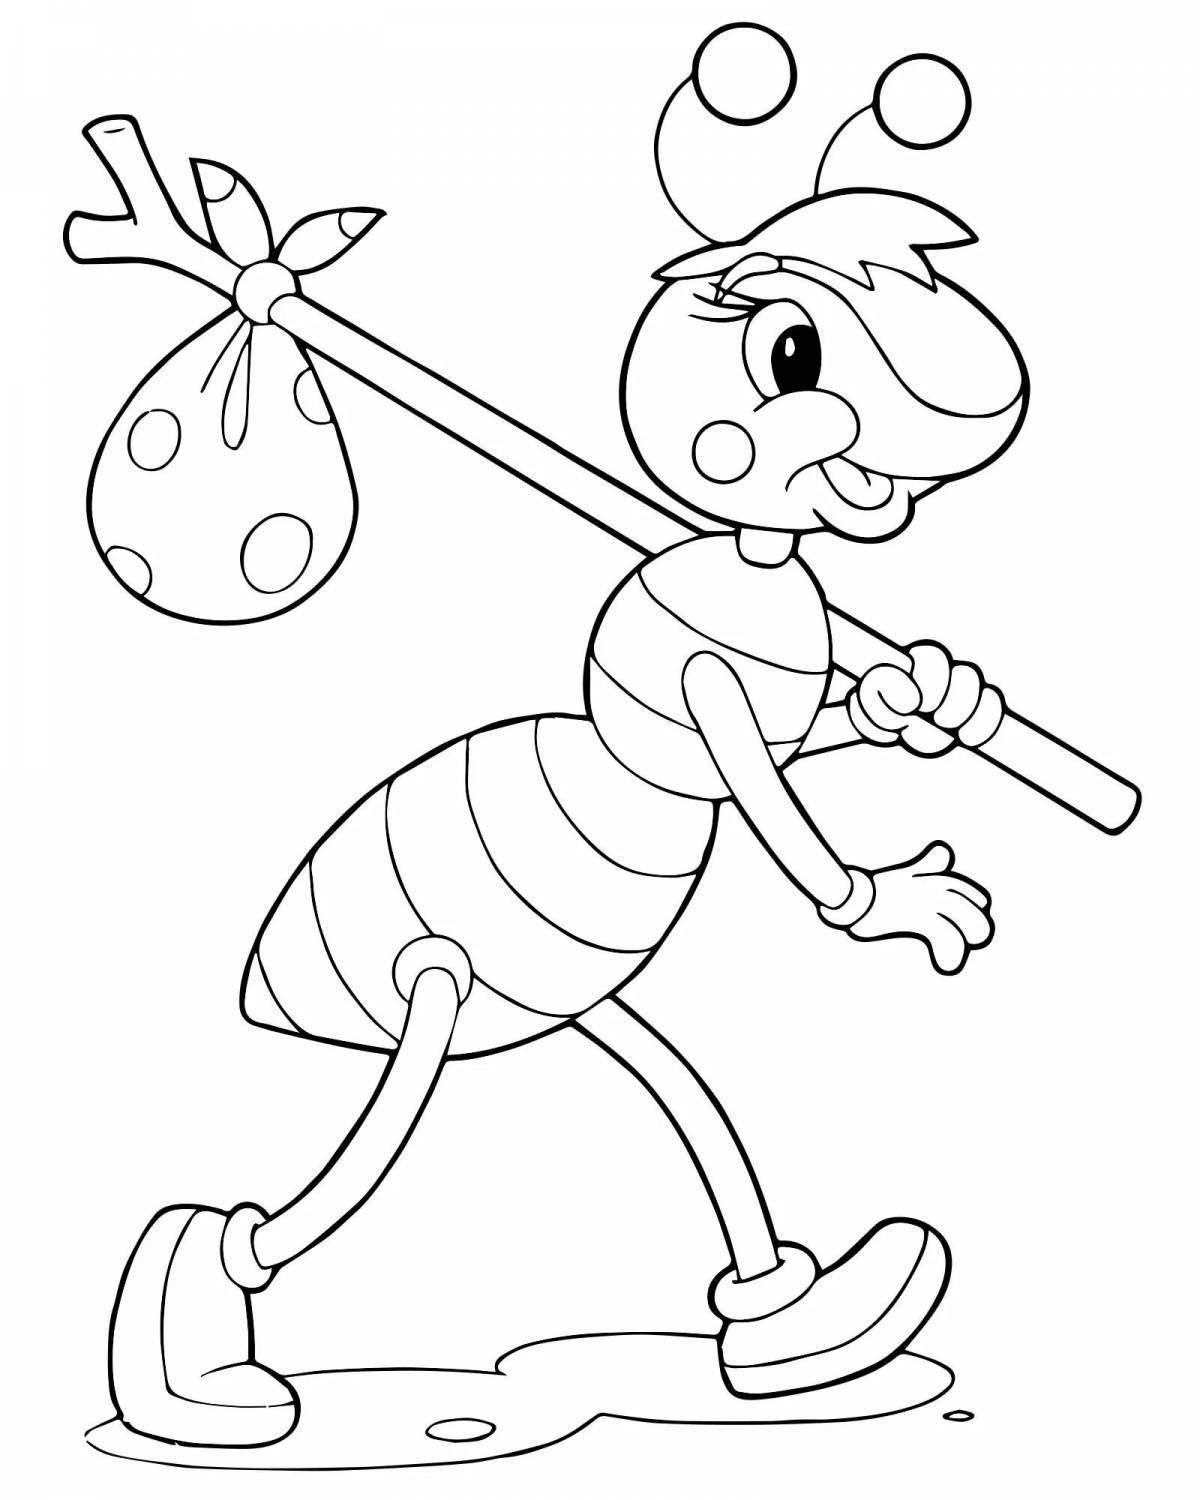 Colorful image of an ant coloring book